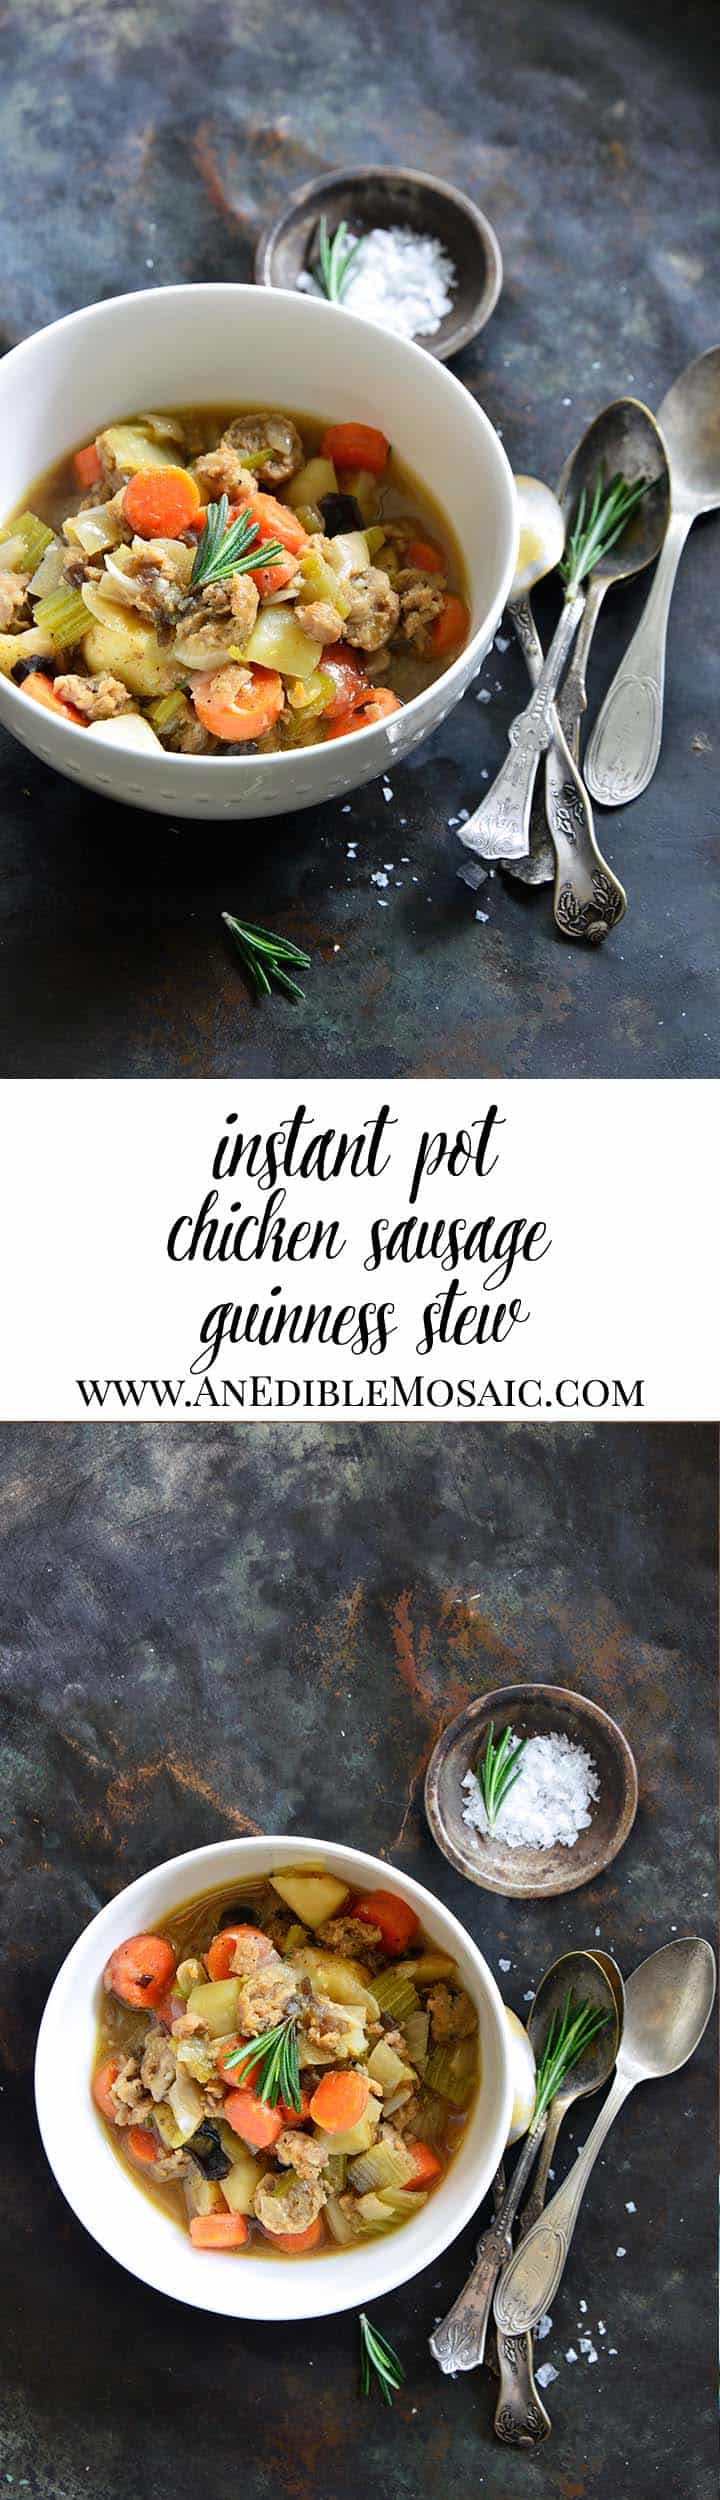 Instant Pot Chicken Sausage Guinness Stew Long Pin